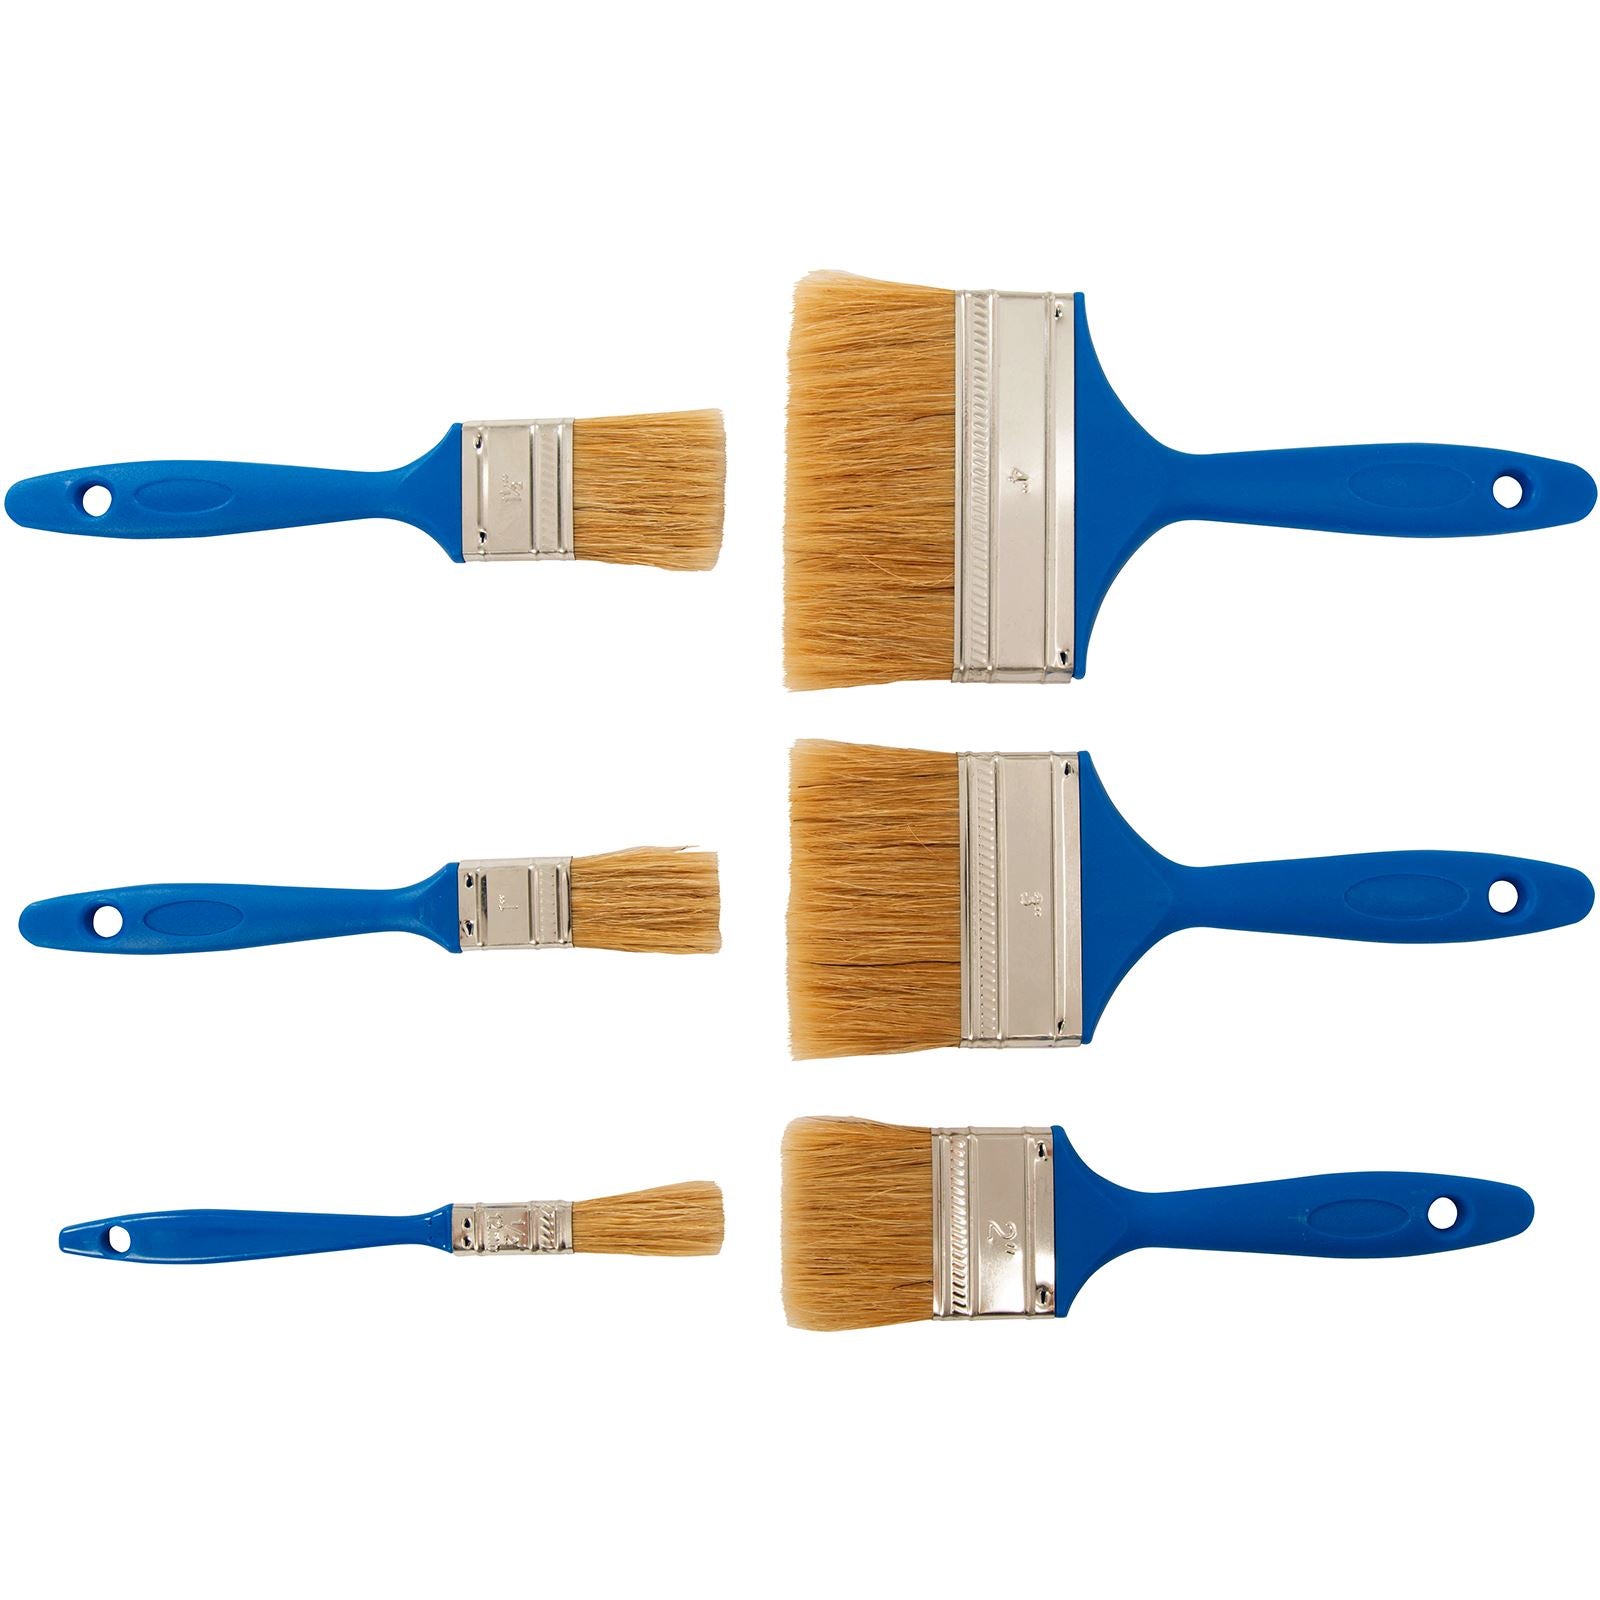 Silverline Disposable Paint Brushes Brush All Sizes All Quantities Decorating